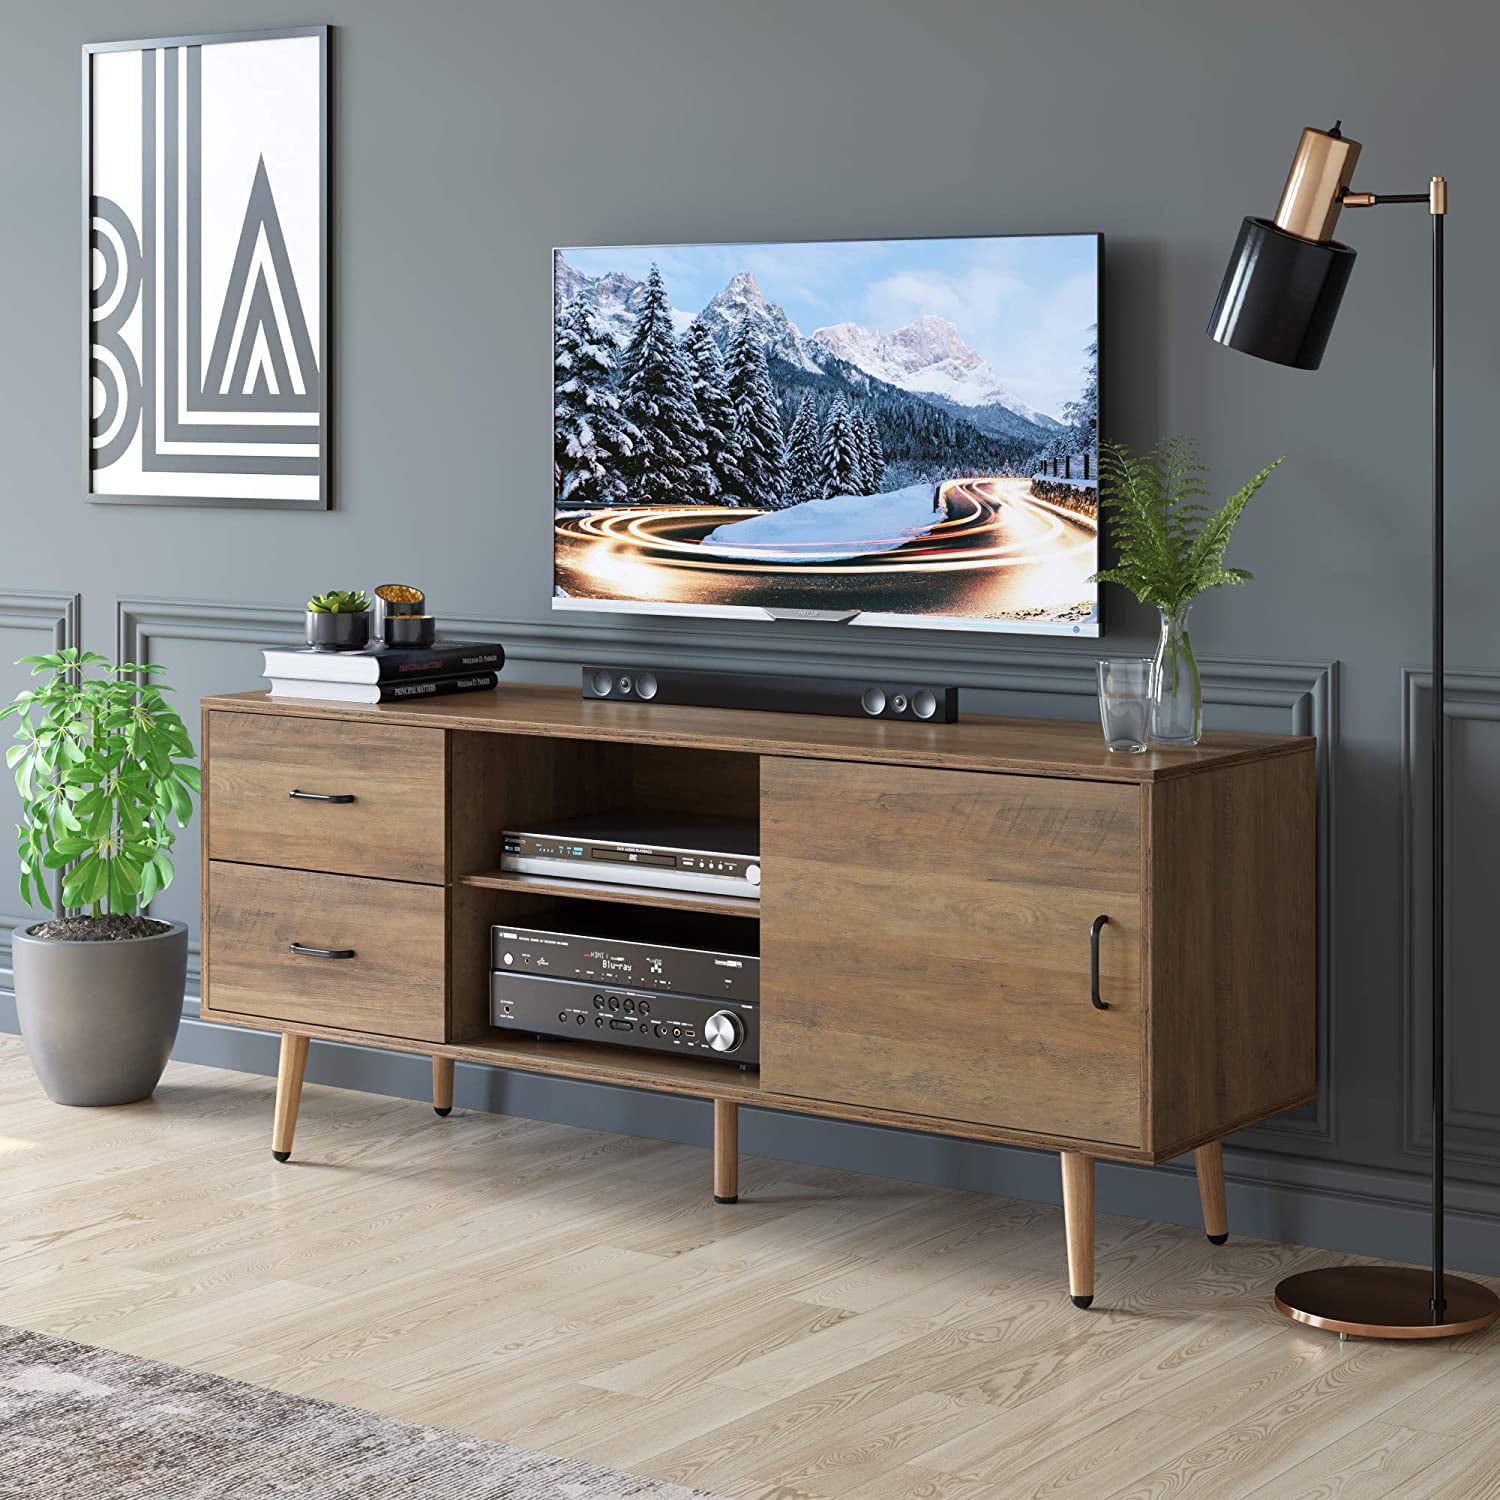 Homfa Tv Cabinet Media Console Table, Wood Tv Stand For Tvs Up To 60 For Media Entertainment Center Tv Stands (View 8 of 20)